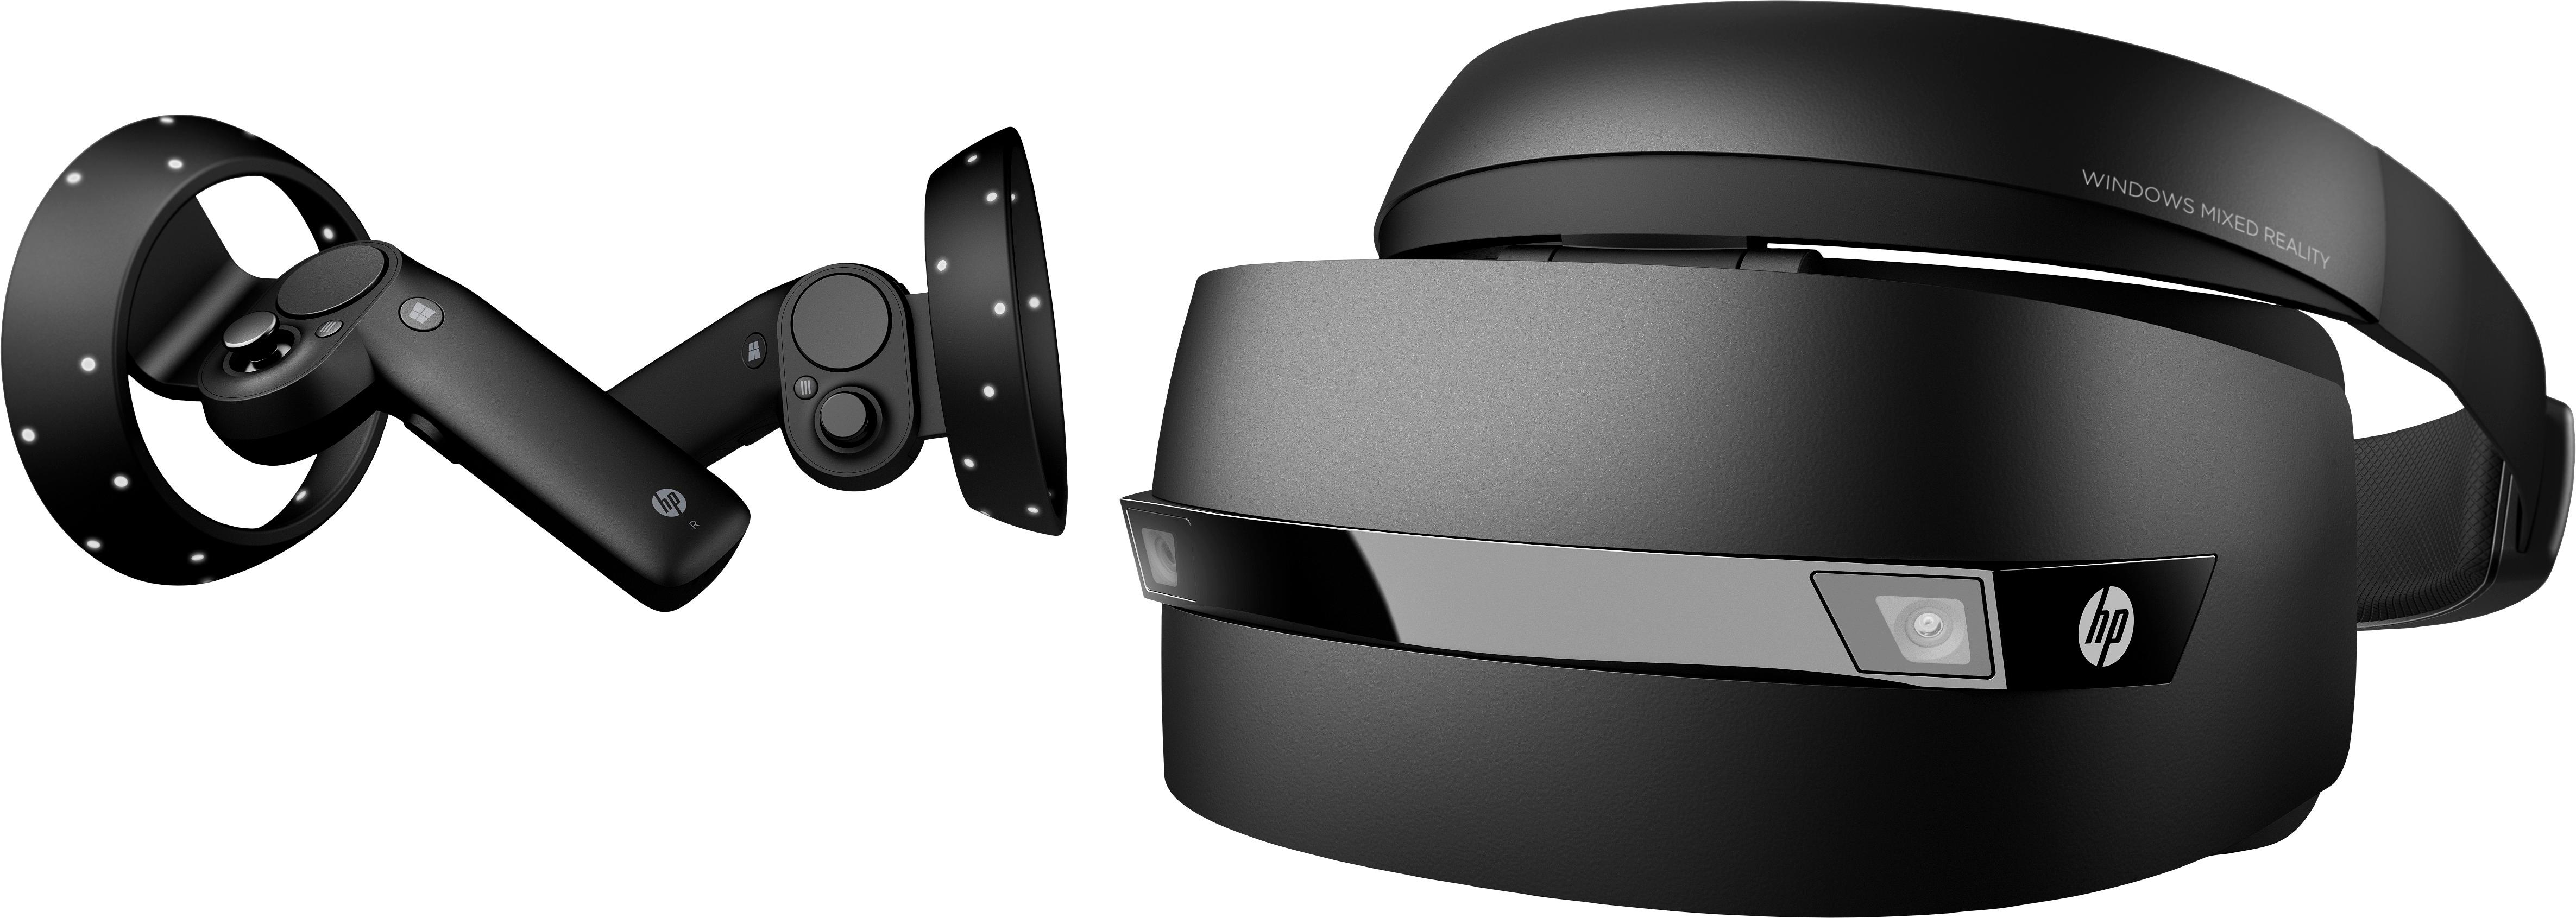 hp vr headset review